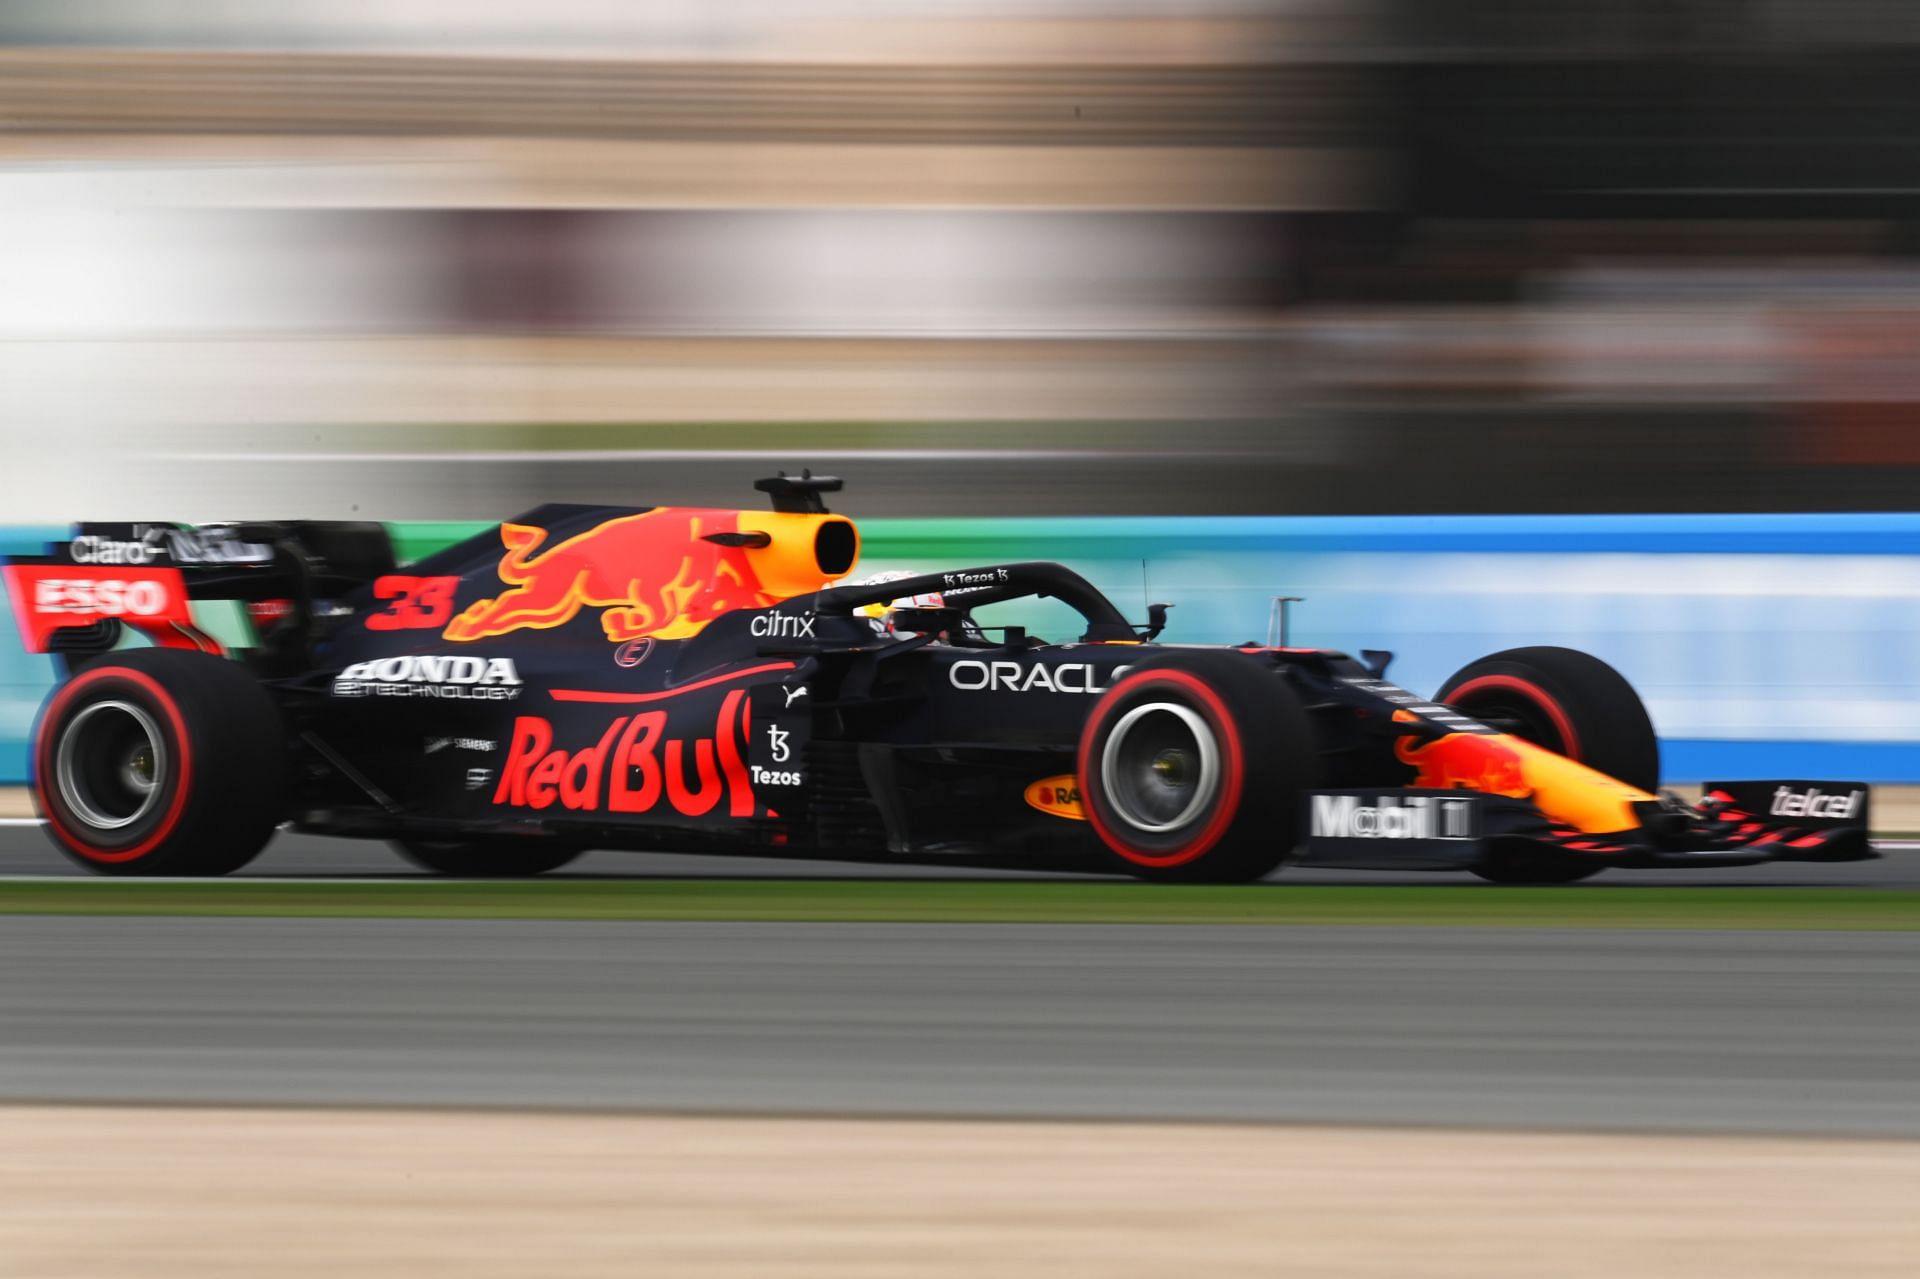 Max Verstappen led the first practice session of the Qatar Grand Prix 2021